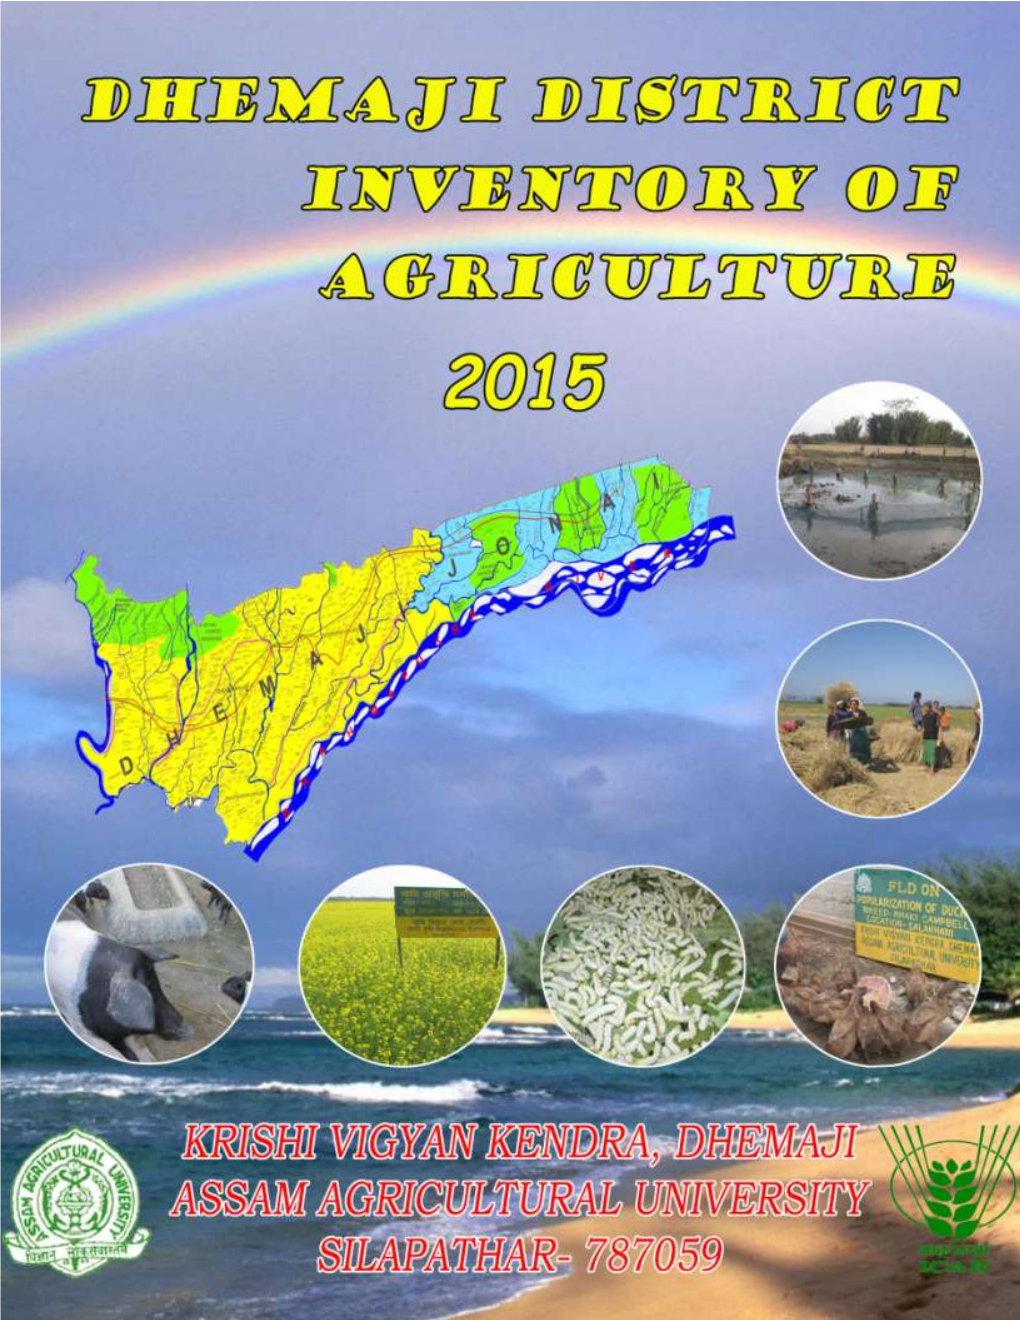 Dhemaji District Inventory of Agriculture 2015